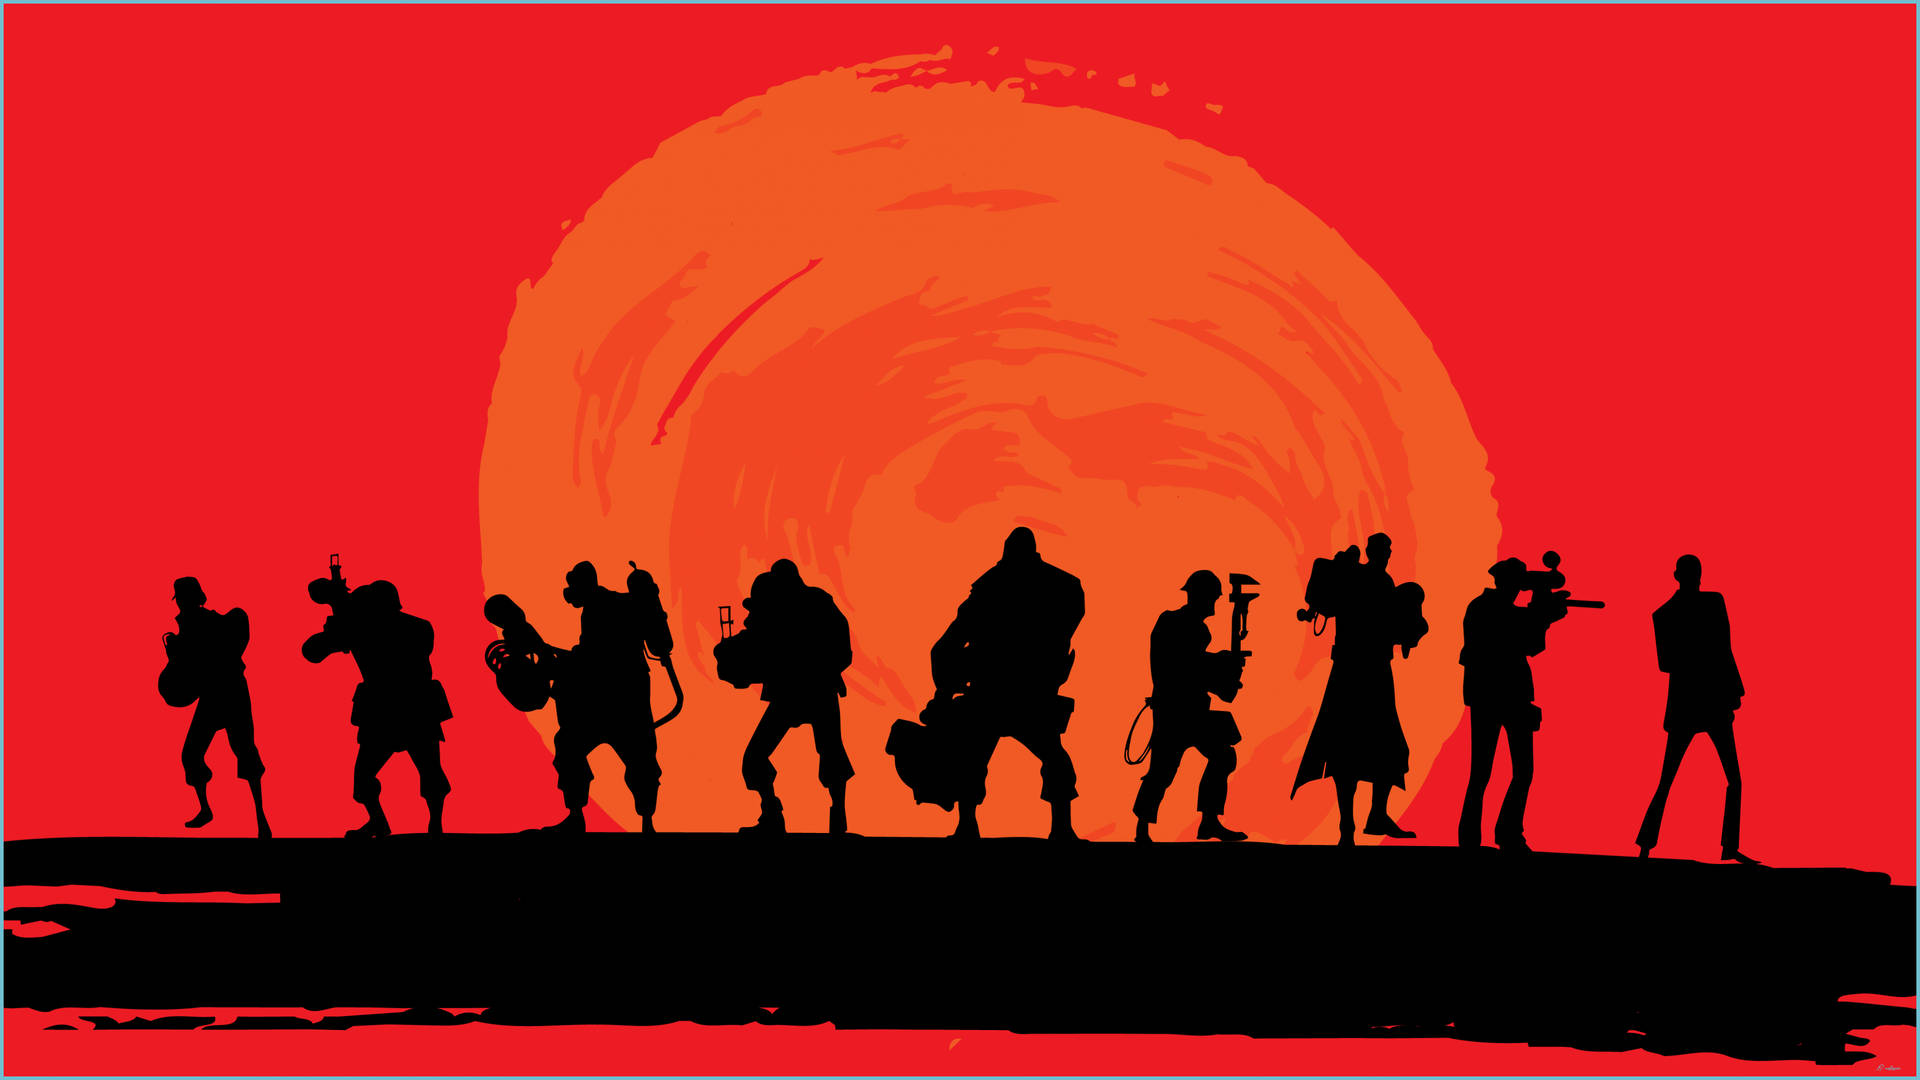 Tf2 Characters On Red Background